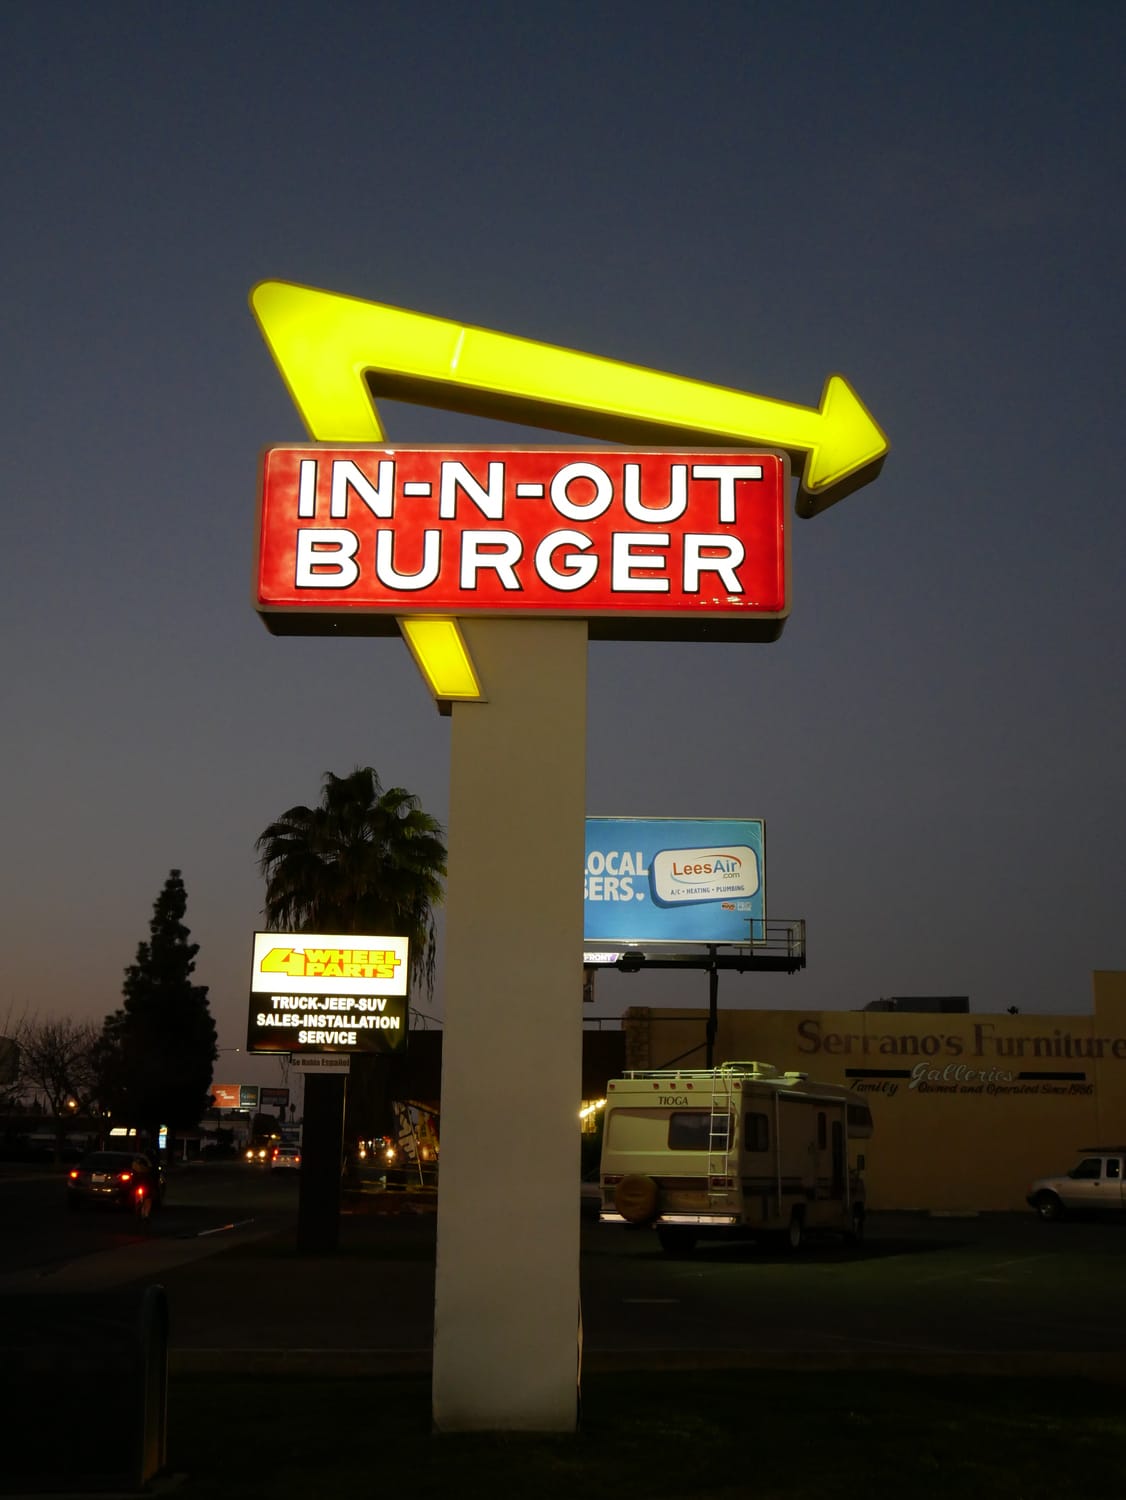 In-N-Out Burger fast food chain sign at night